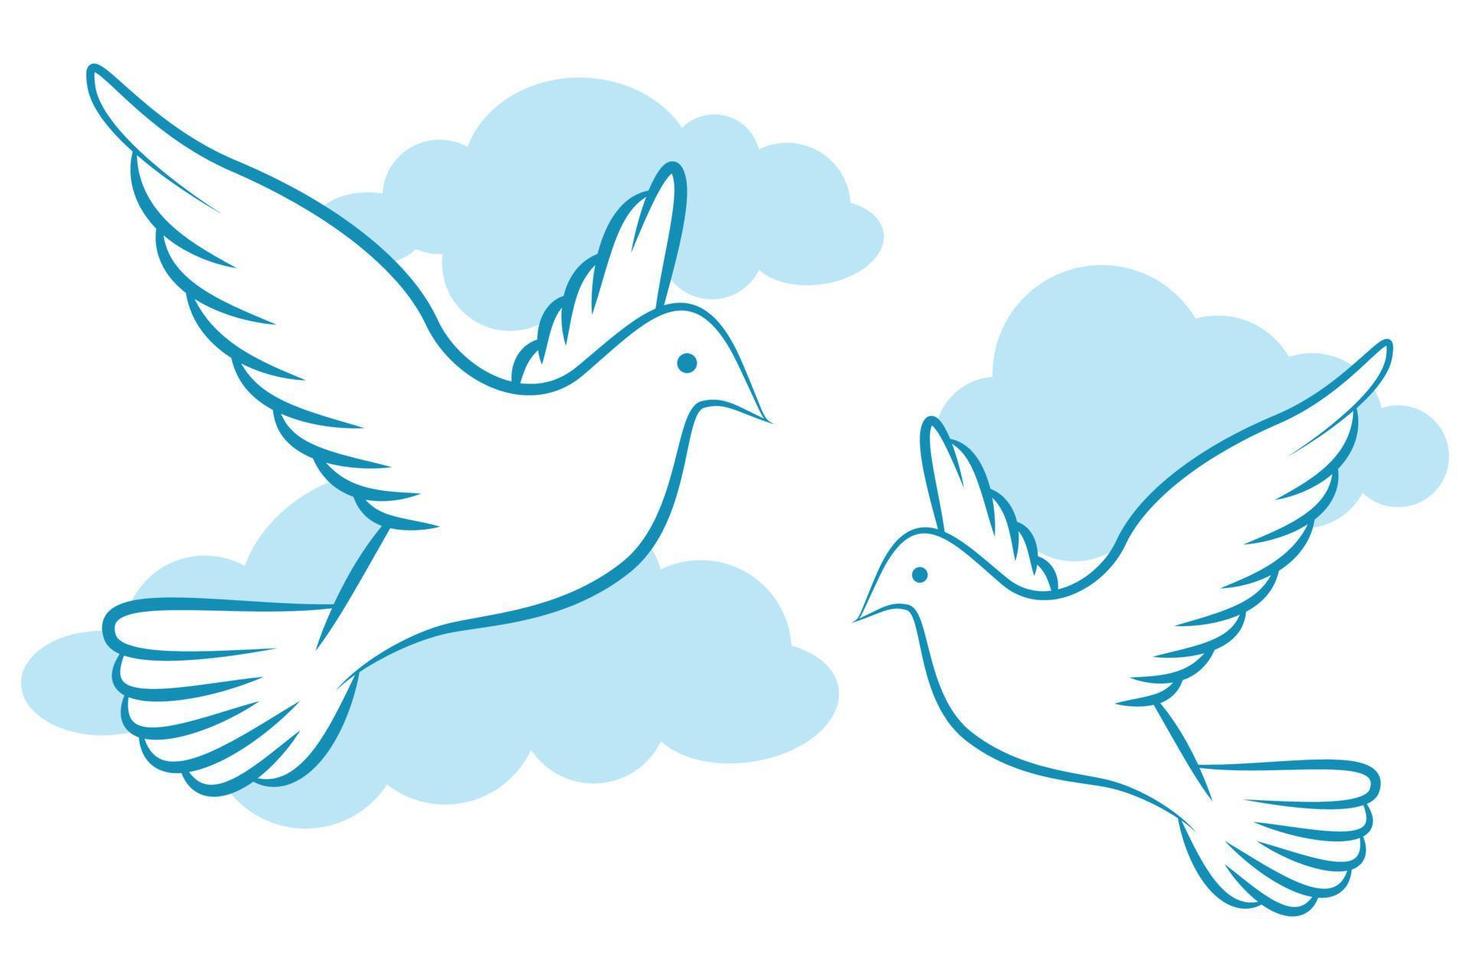 Pentecost Sunday background with flying dove vector